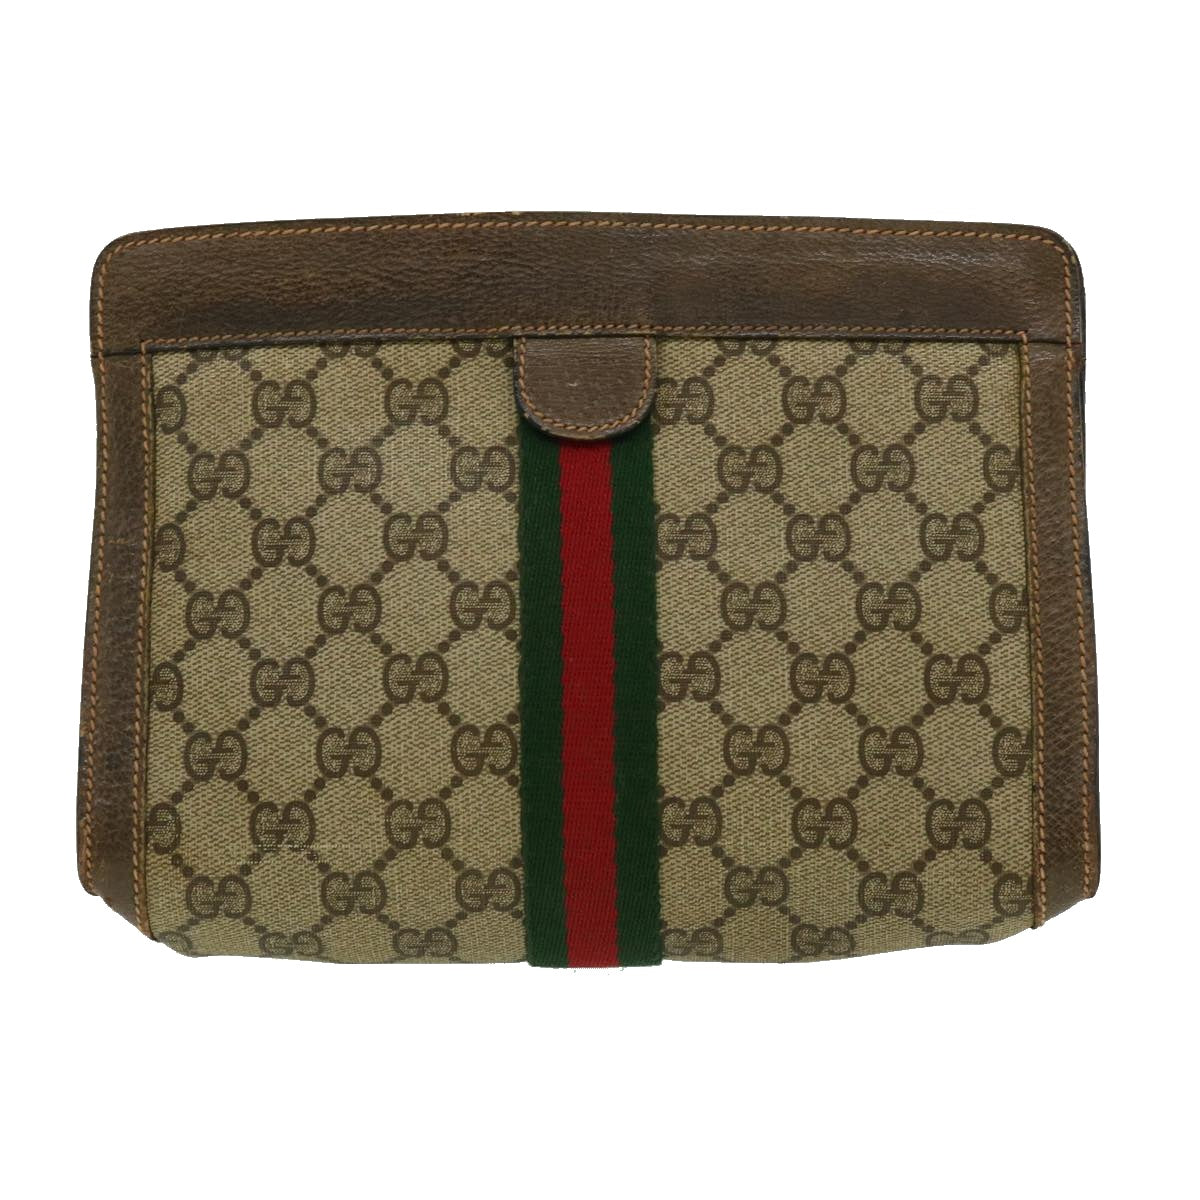 GUCCI GG Canvas Web Sherry Line Clutch Bag Beige Green Red Auth th2821